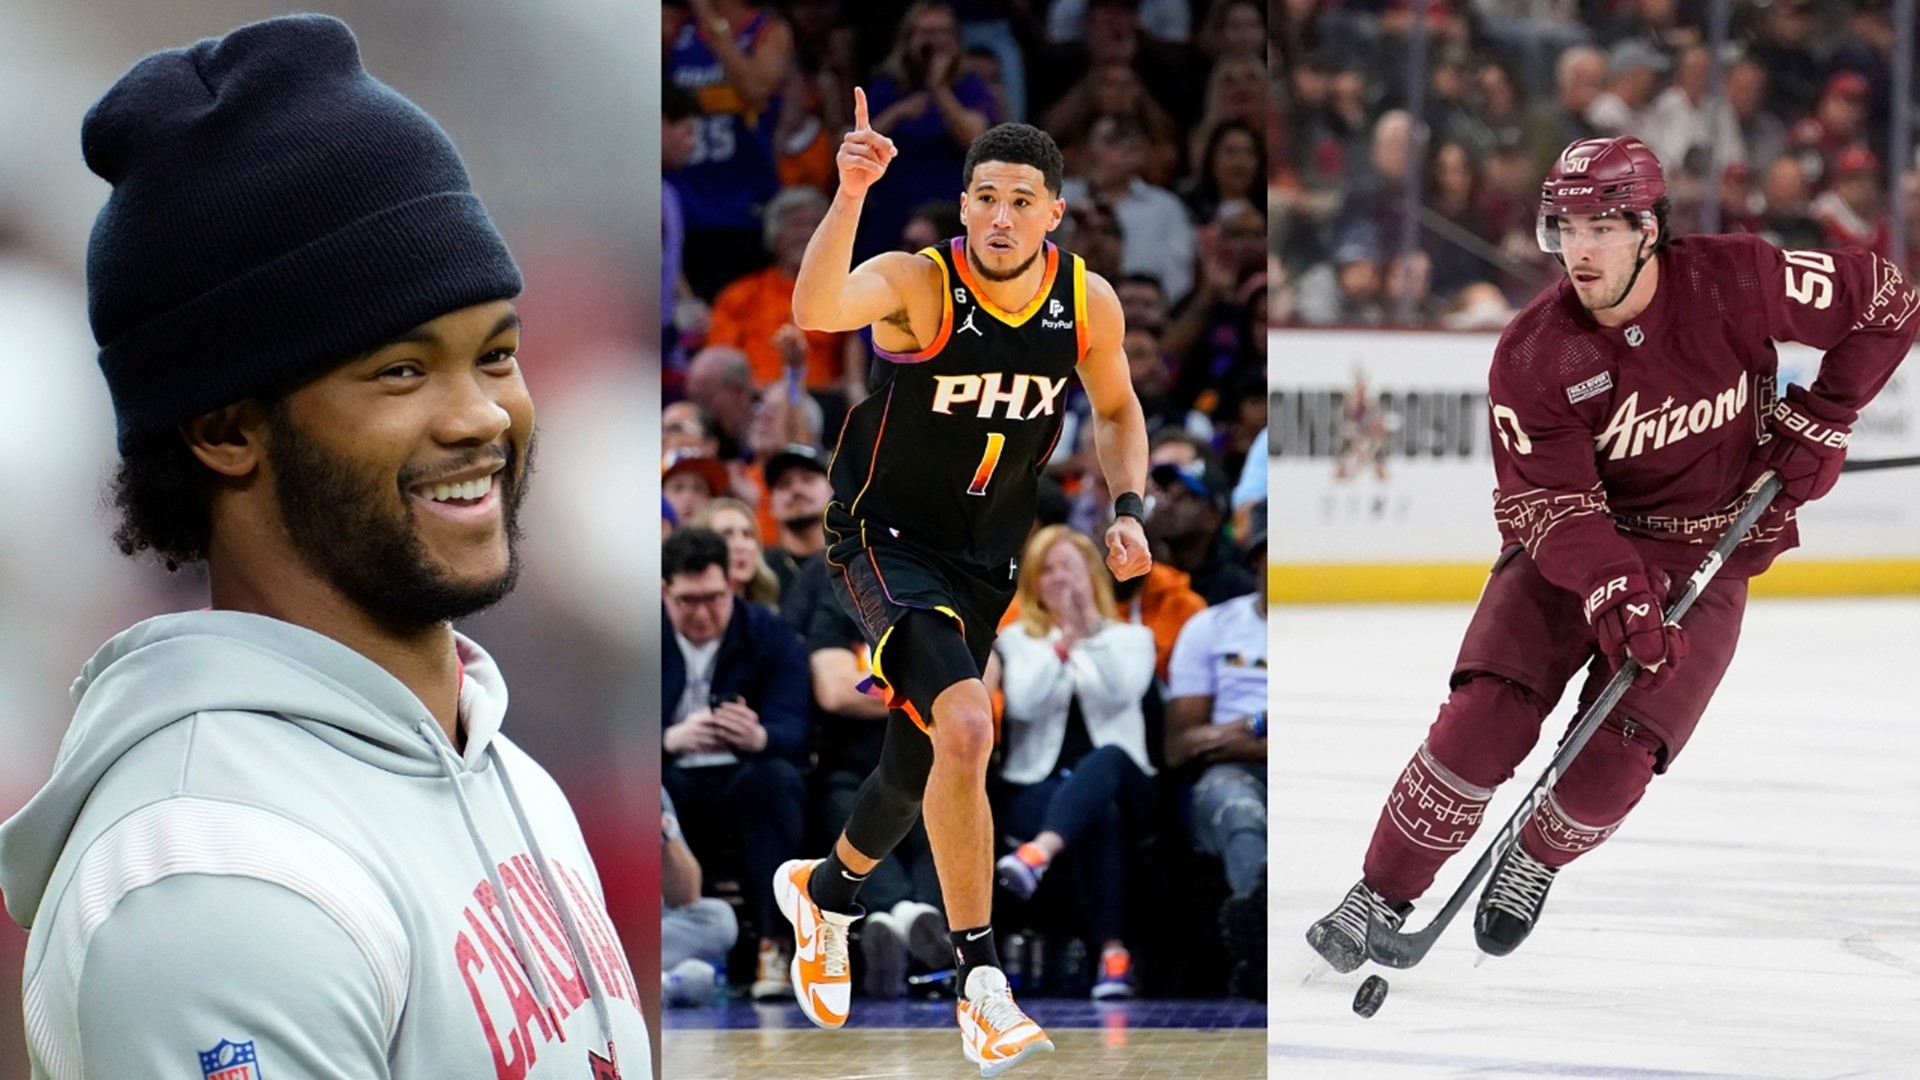 in this edition of 'Triple Threat,' Cameron Cox, Lina Washington and Luke Lyddon talk about 3 of top sports topics in Arizona: Kyler Murray, the Suns and the Coyotes